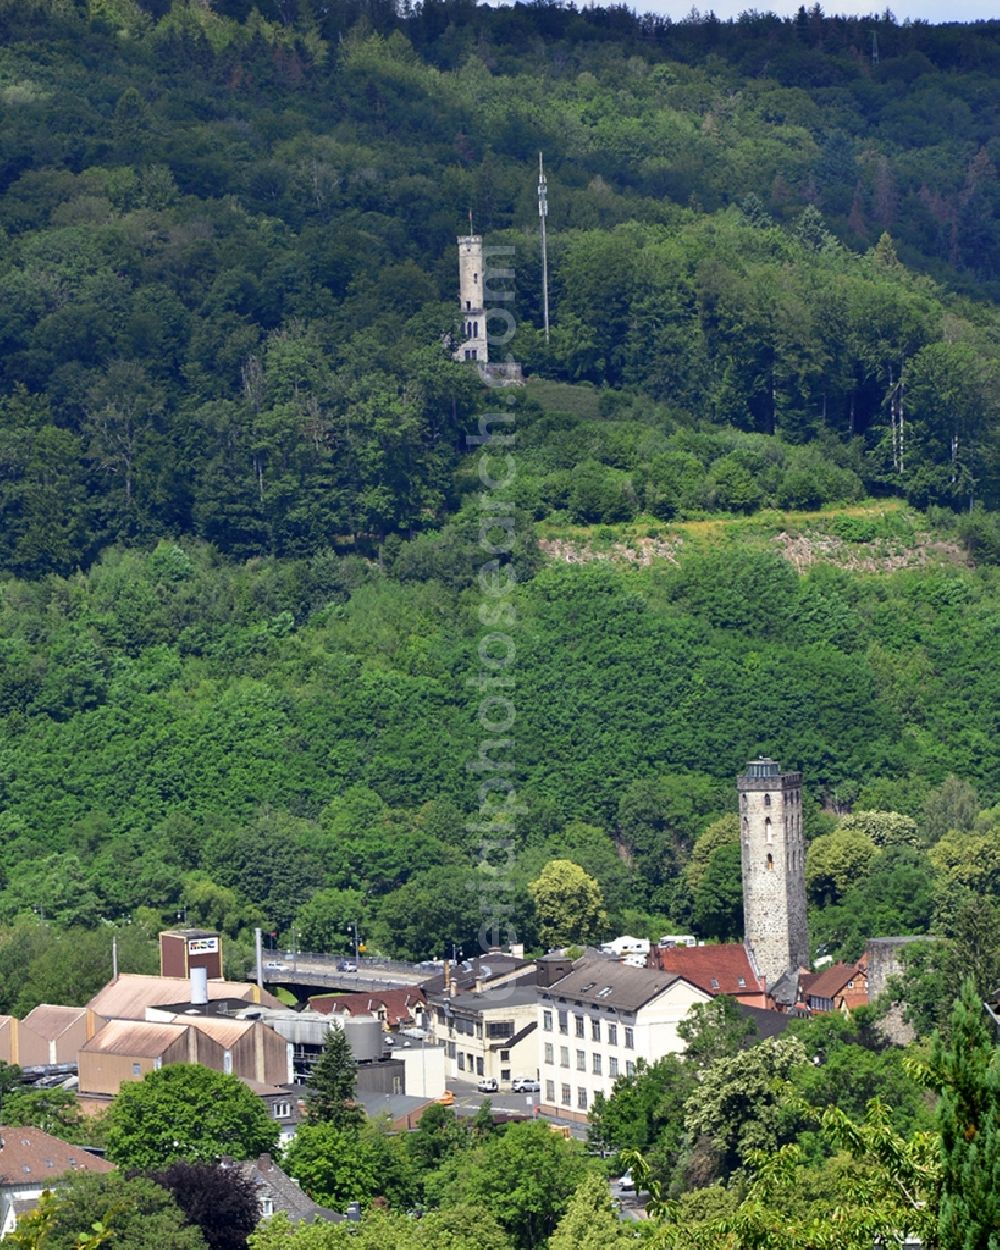 Aerial photograph Hann. Münden - Structure of the observation tower Hagelturm and Tillyschanze in Hann. Muenden in the state Lower Saxony, Germany